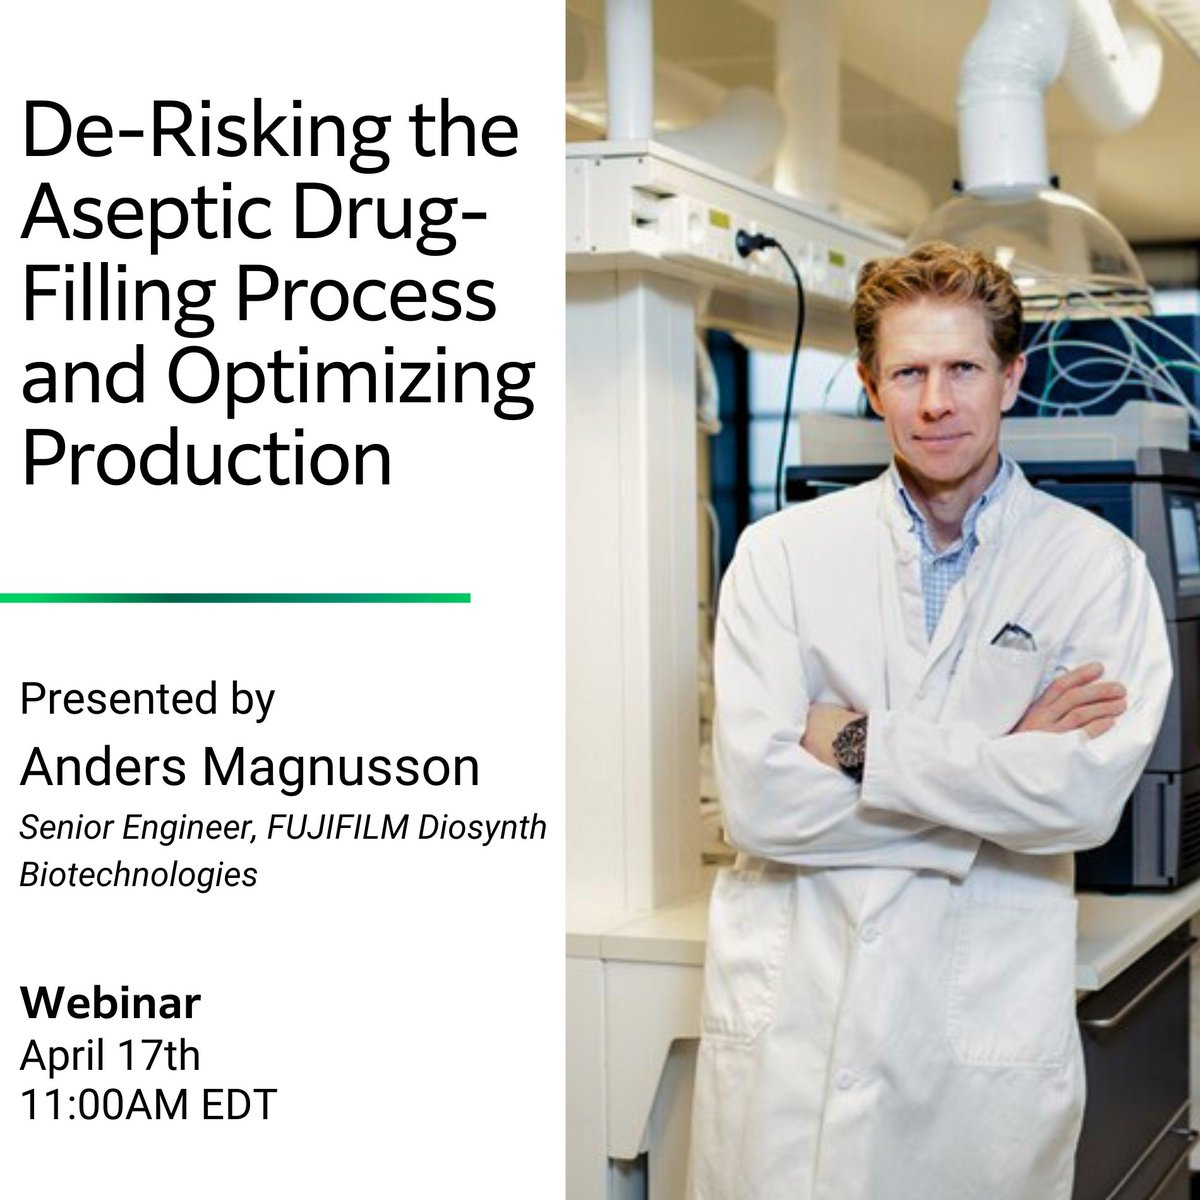 Join us on April 17th, at 11:00AM EDT for a webinar on “De-Risking the Aseptic Drug-Filling Process and Optimizing Production.” Led by our very own, Anders Magnusson, Senior Engineer, at FUJIFILM Diosynth Biotechnologies. event.on24.com/wcc/r/4519233/…